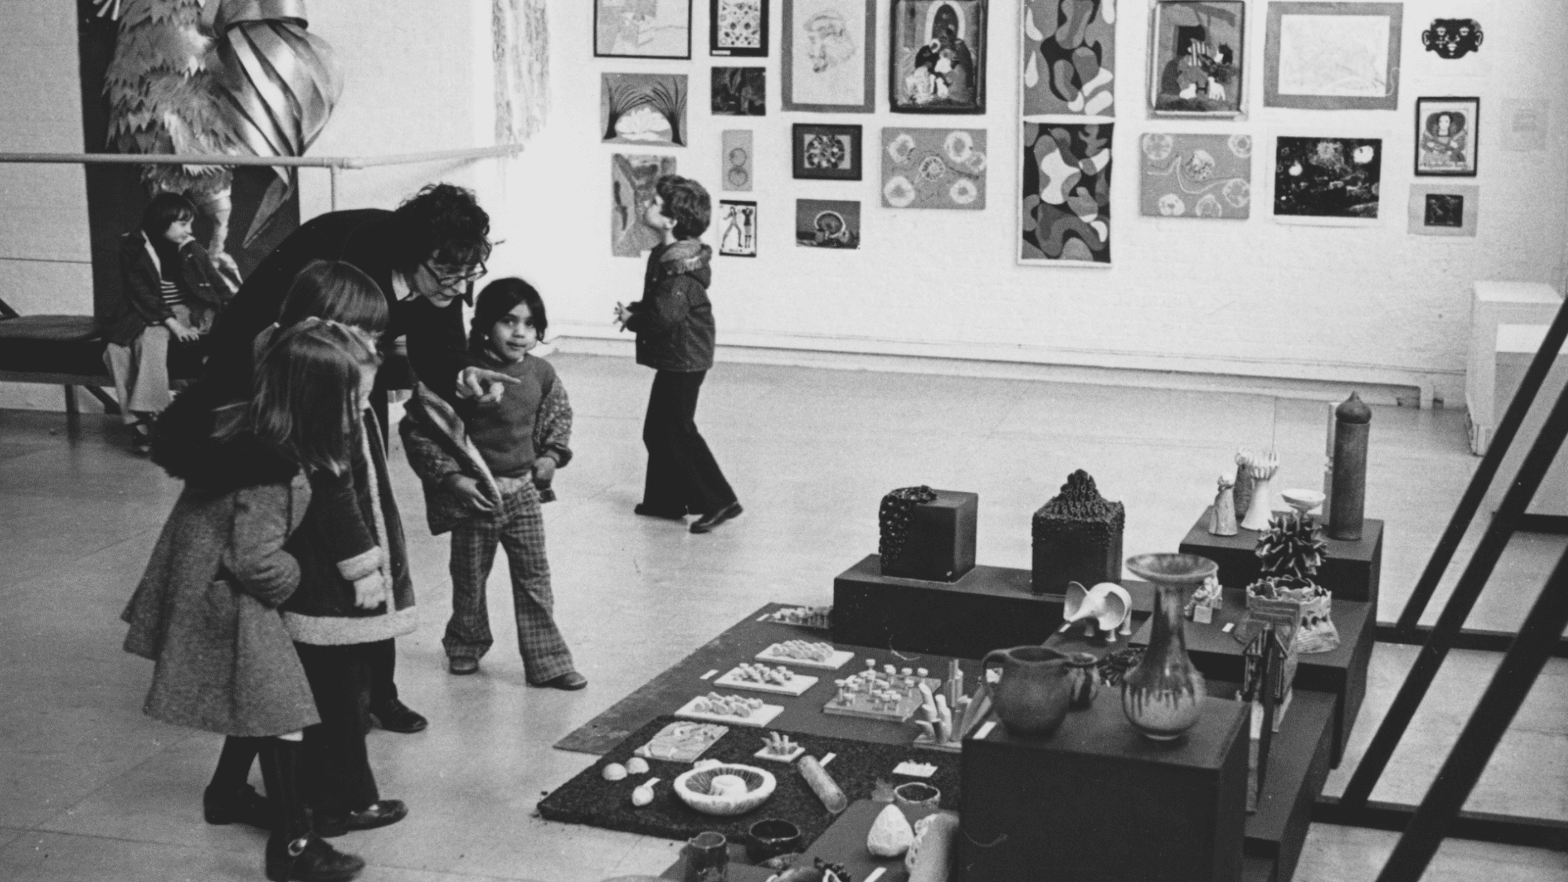 Black and white photo of an adult bending down to talk to three small children in an art gallery. The adult is pointing at a display of ceramic pots and objects laid out on the floor in front of them. In the background artworks are displayed on a white wall.